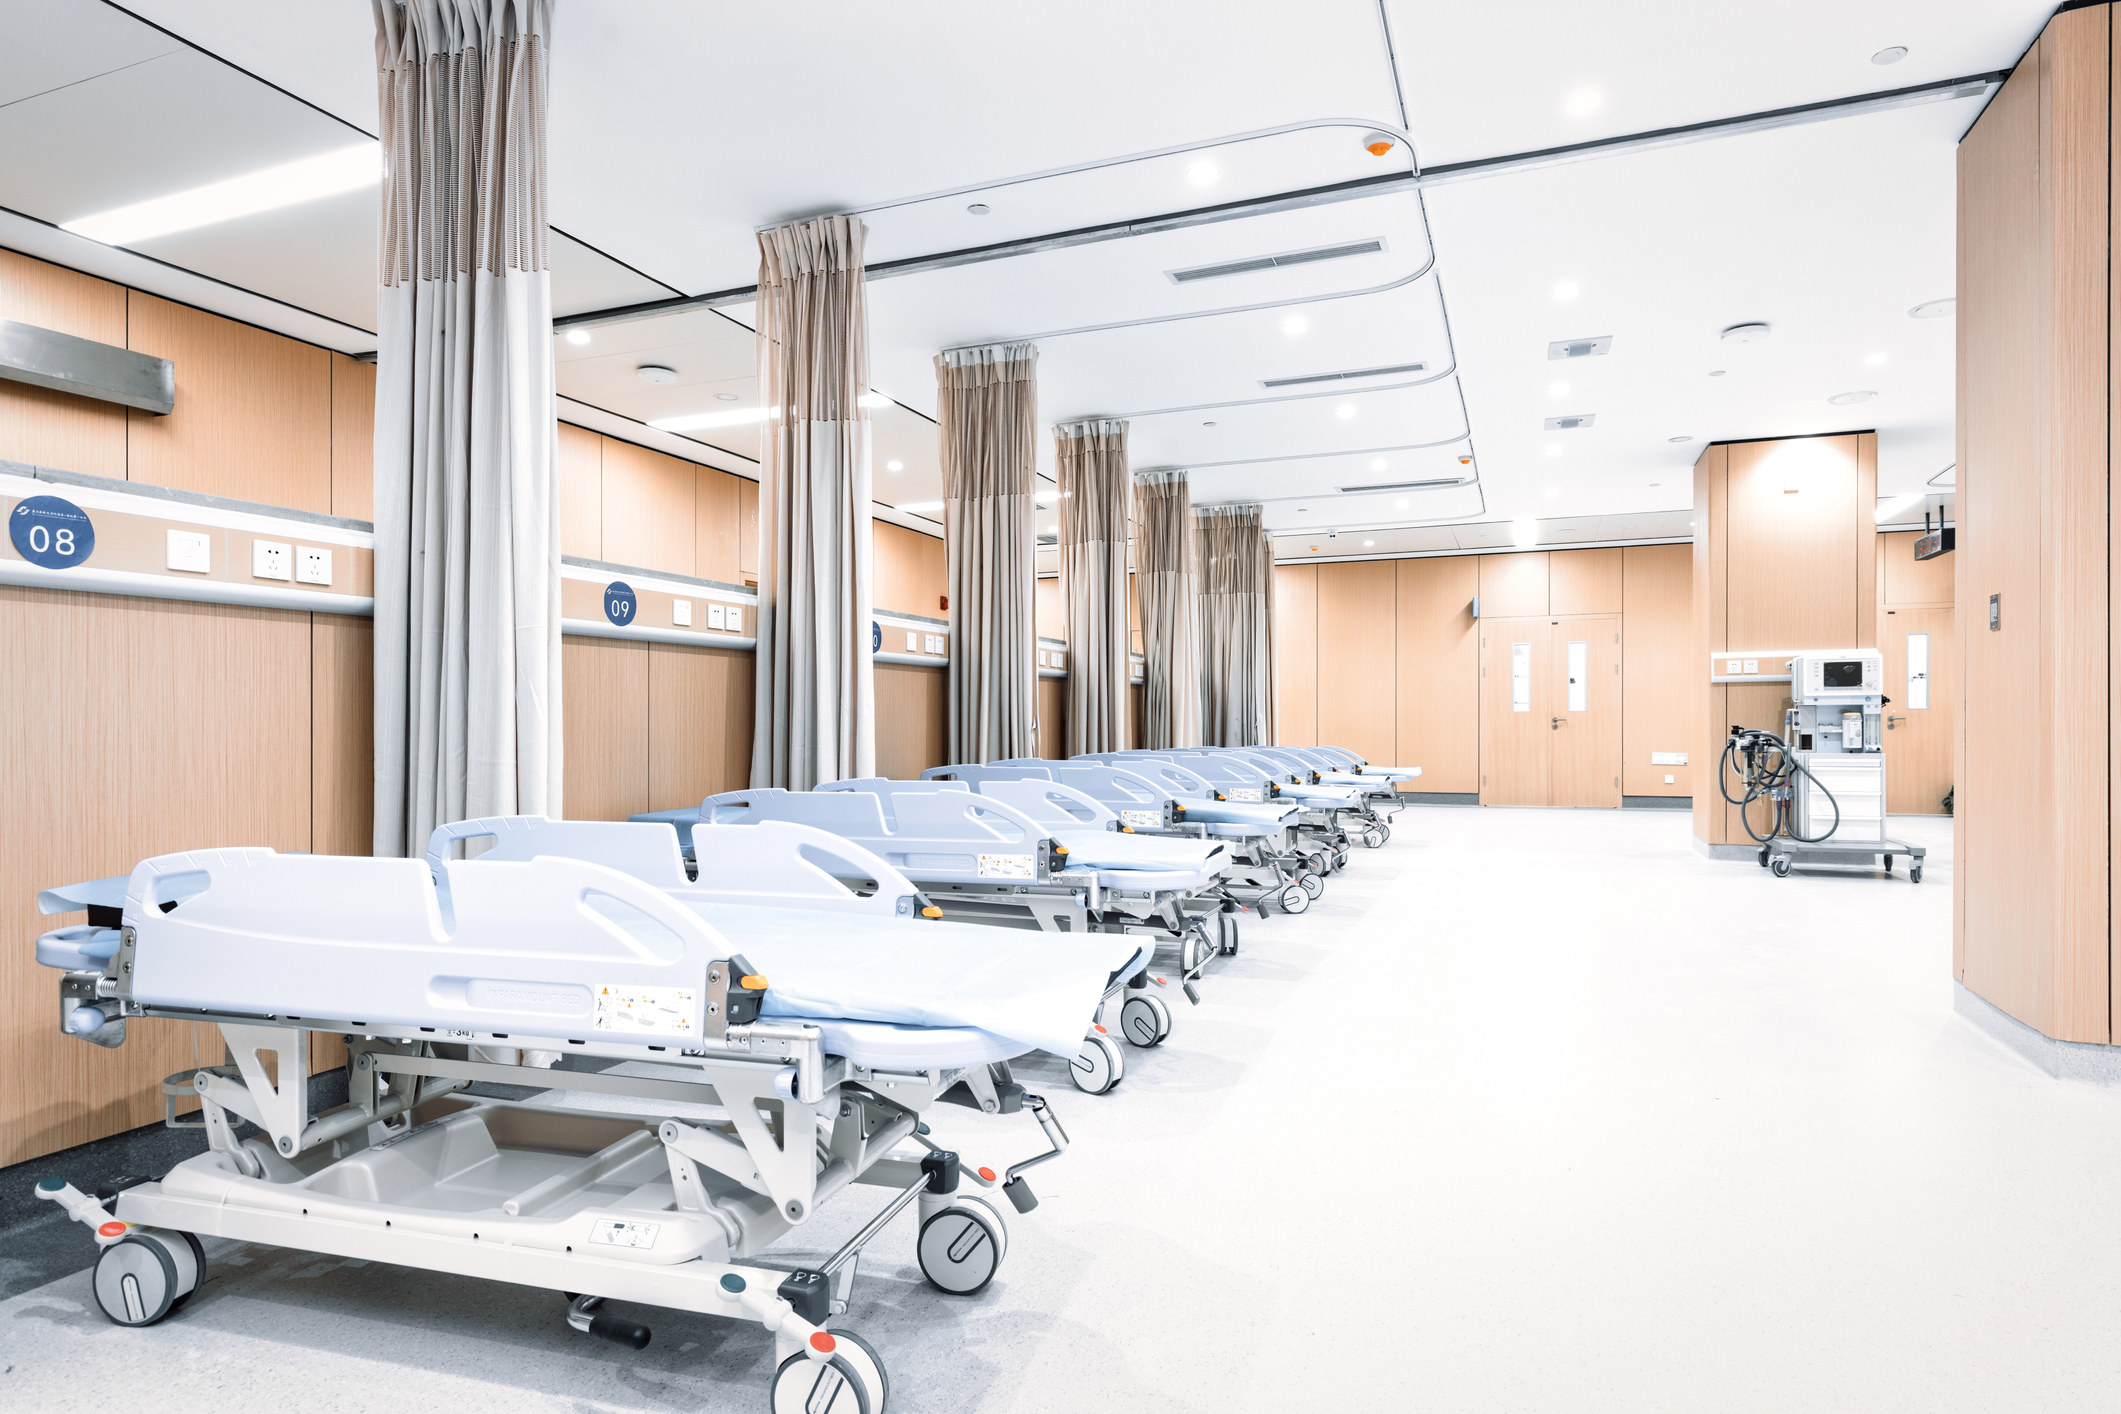 Empty beds in a hospital wing